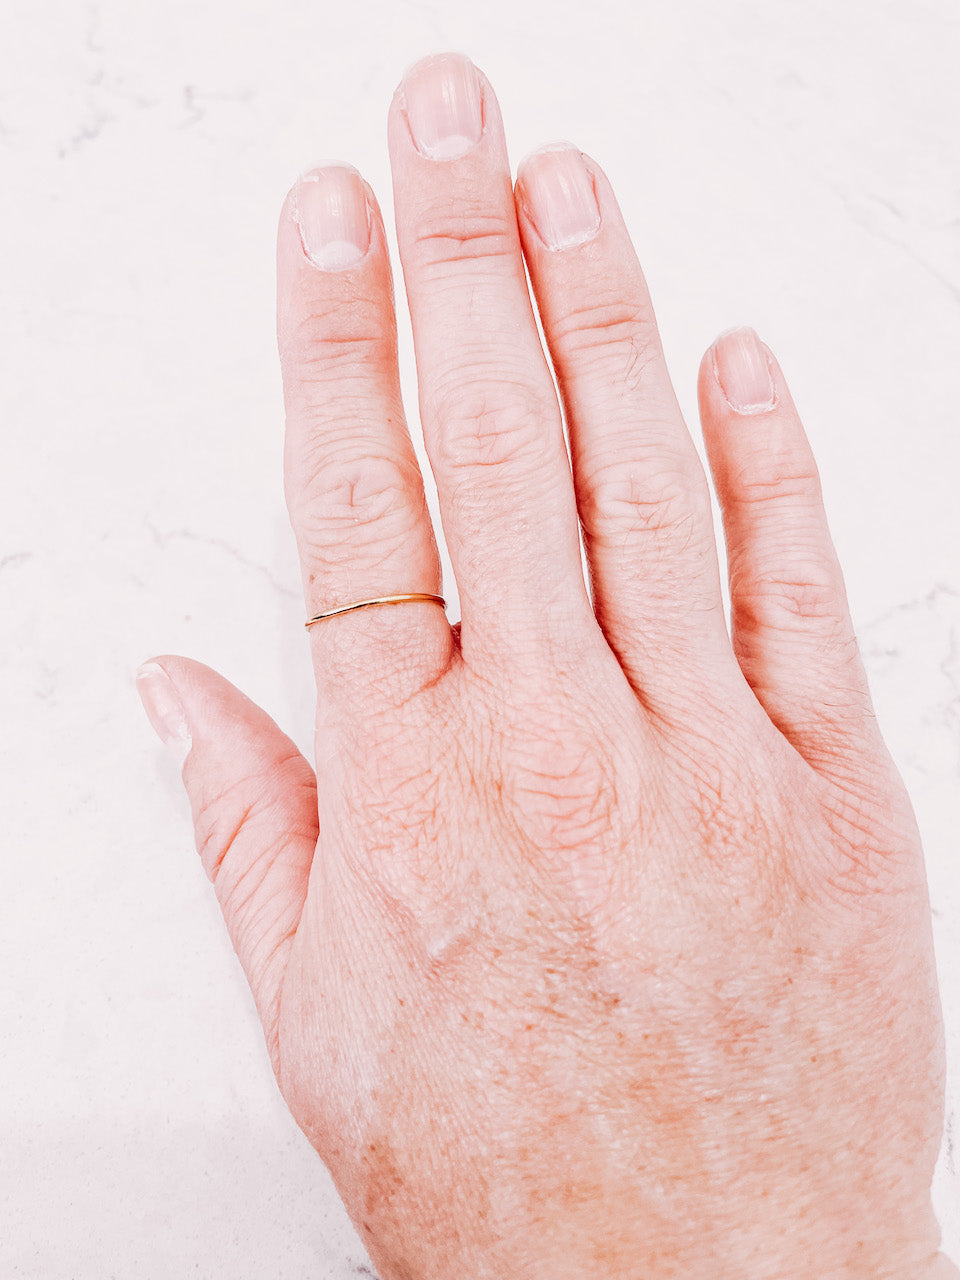 Plain Stacker ring worn on hand by lady startup Australian jewellery label, AW Boutique.